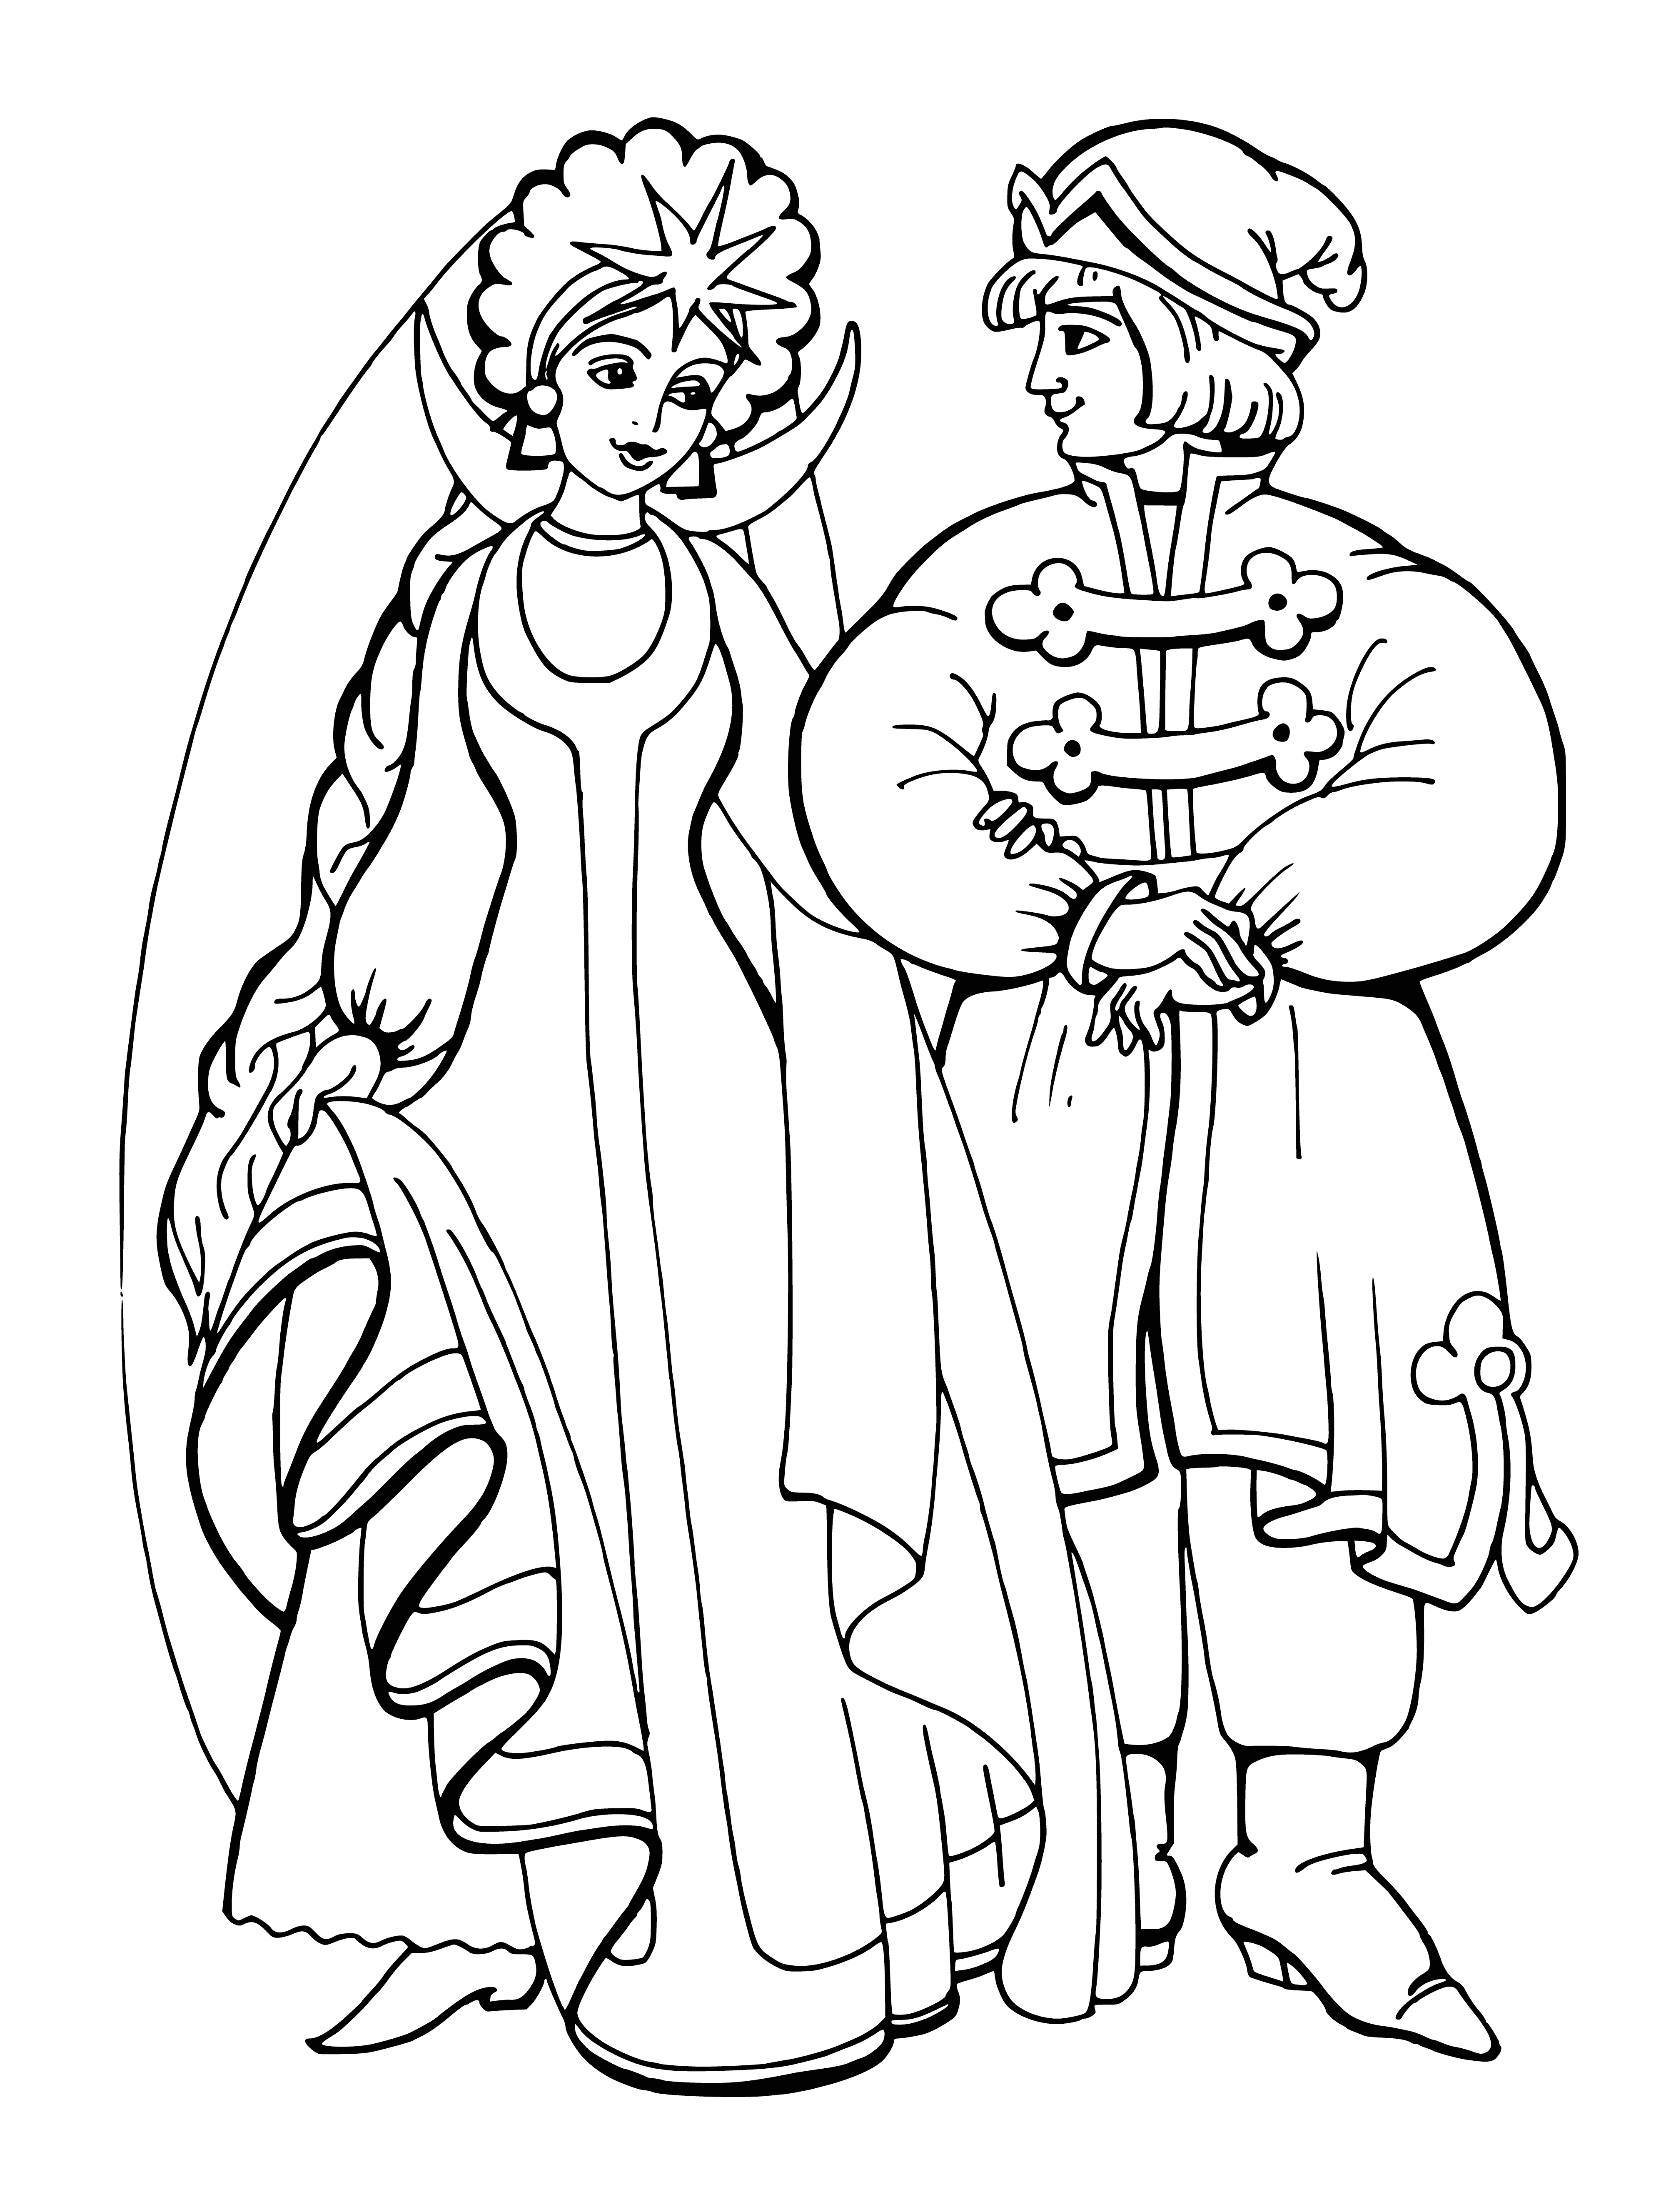 Bride and groom coloring page